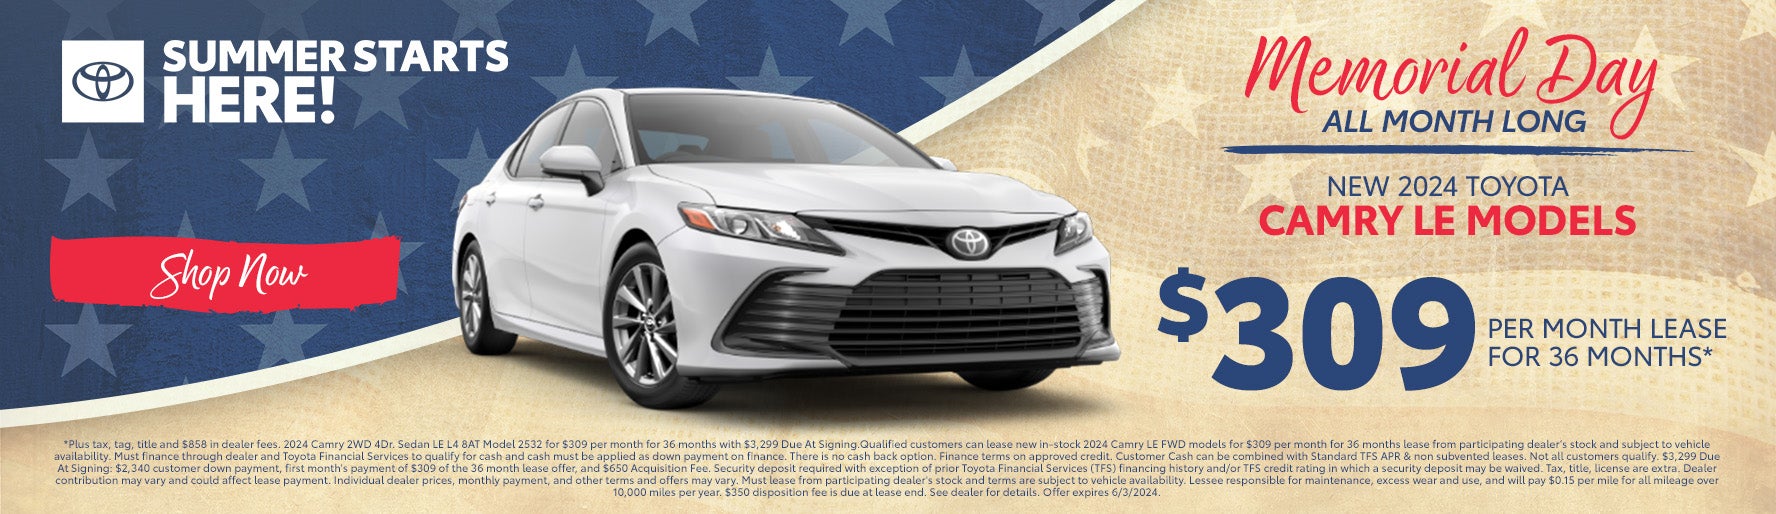 New 2024 Toyota Camry LE Models $309/month for 36 months lea